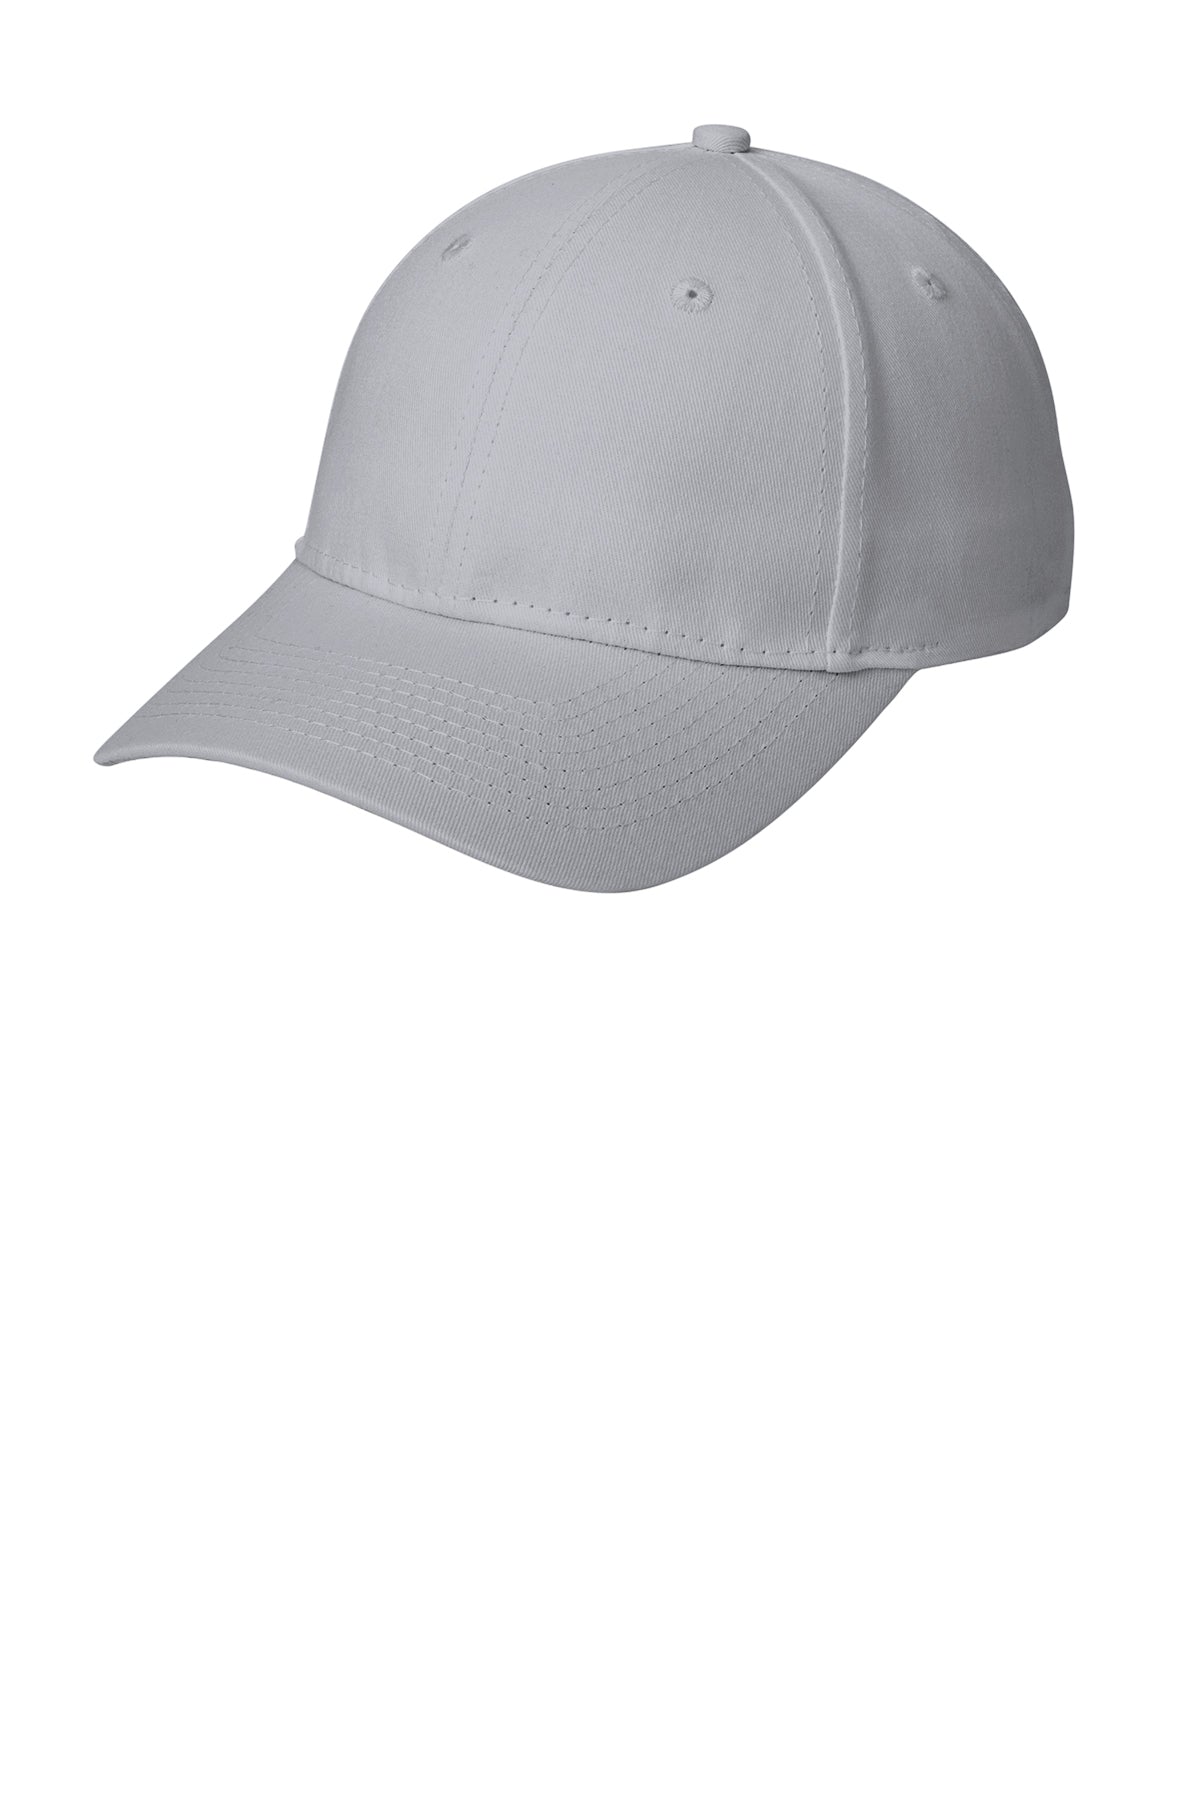 Port & Company Six Panel Twill Branded Caps, Silver